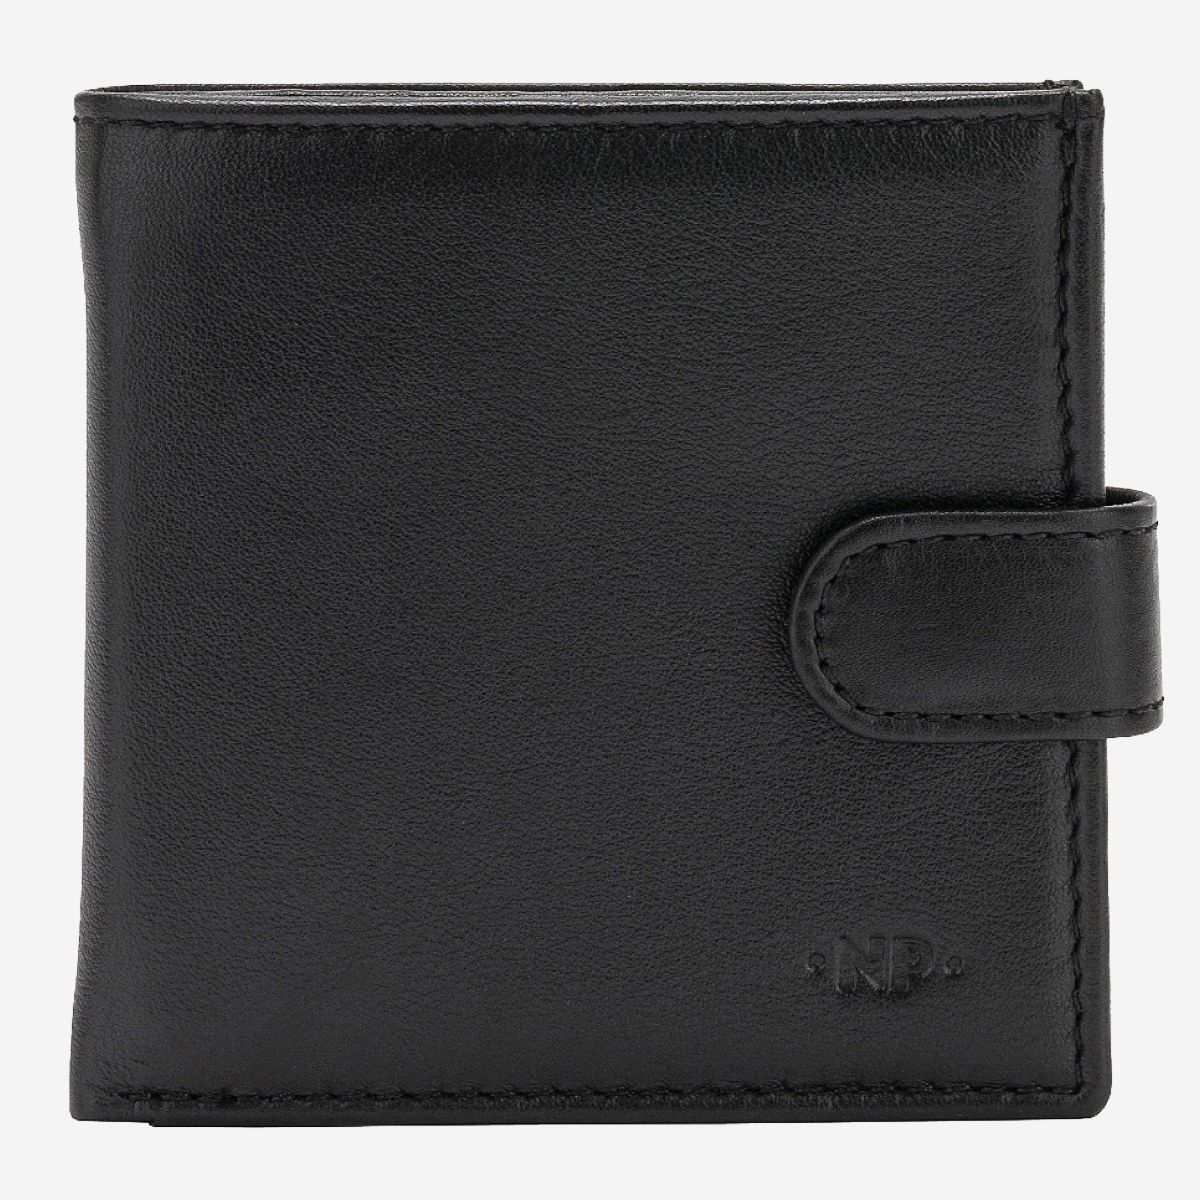 NUVOLA PELLE Mens Leather Wallet With Snap Closure Nappa - Black